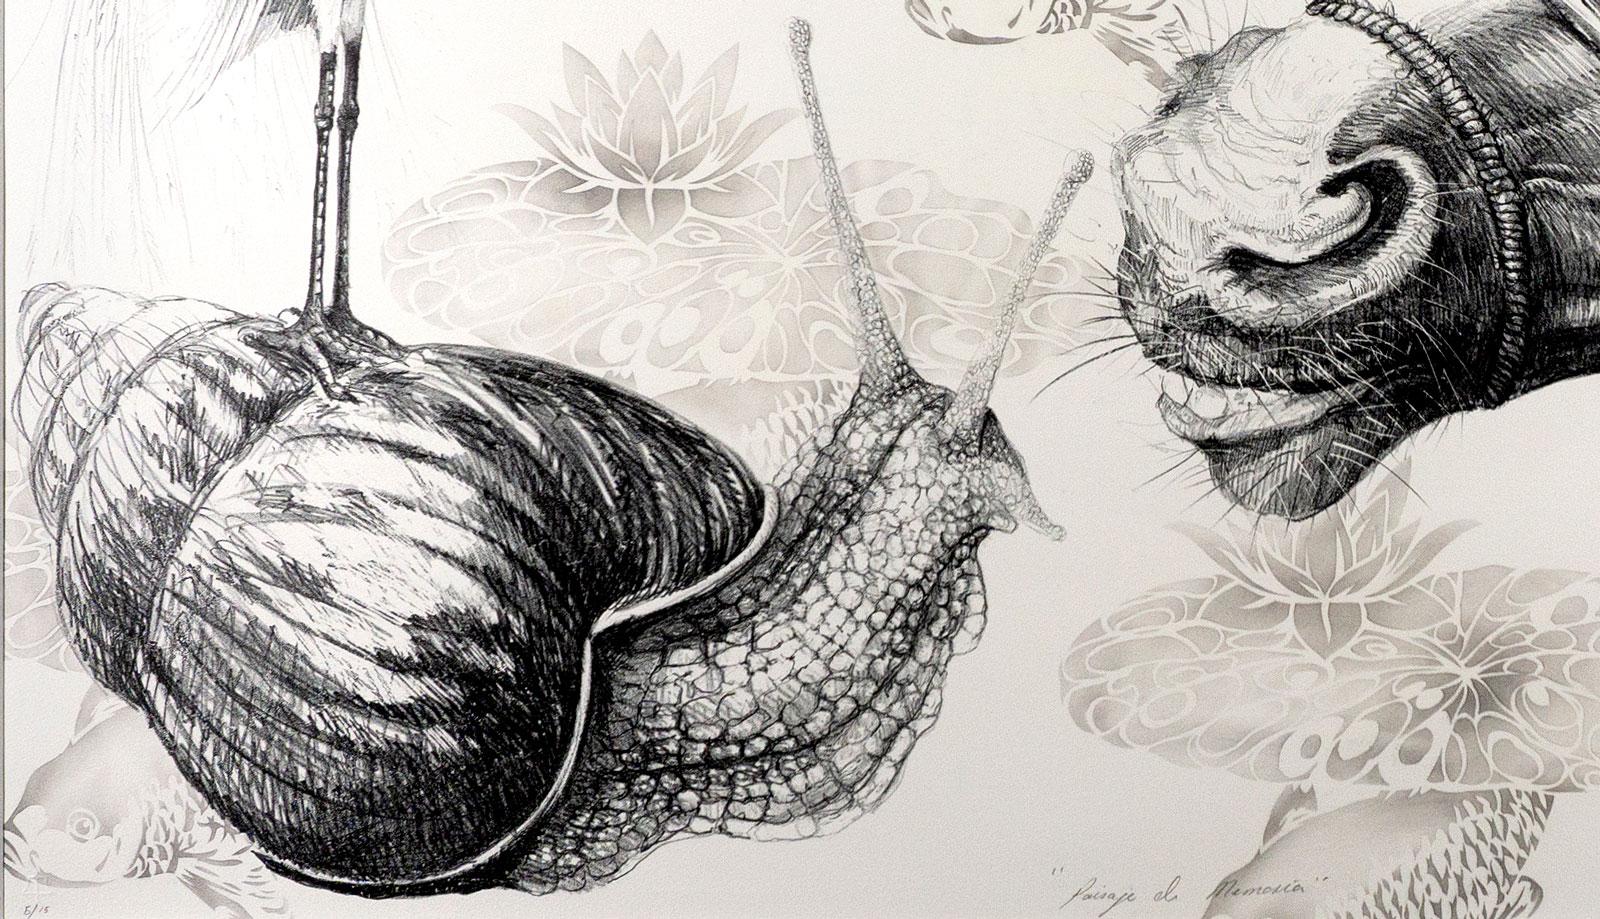 A snail and the head of a horse figure prominently in the artist's landscape of memory. This image was published at Tamarind

Osmeivy Ortega Pacheco, born in 1980 in Havana, Cuba, is one of the island's great emerging printmakers.  Having balanced